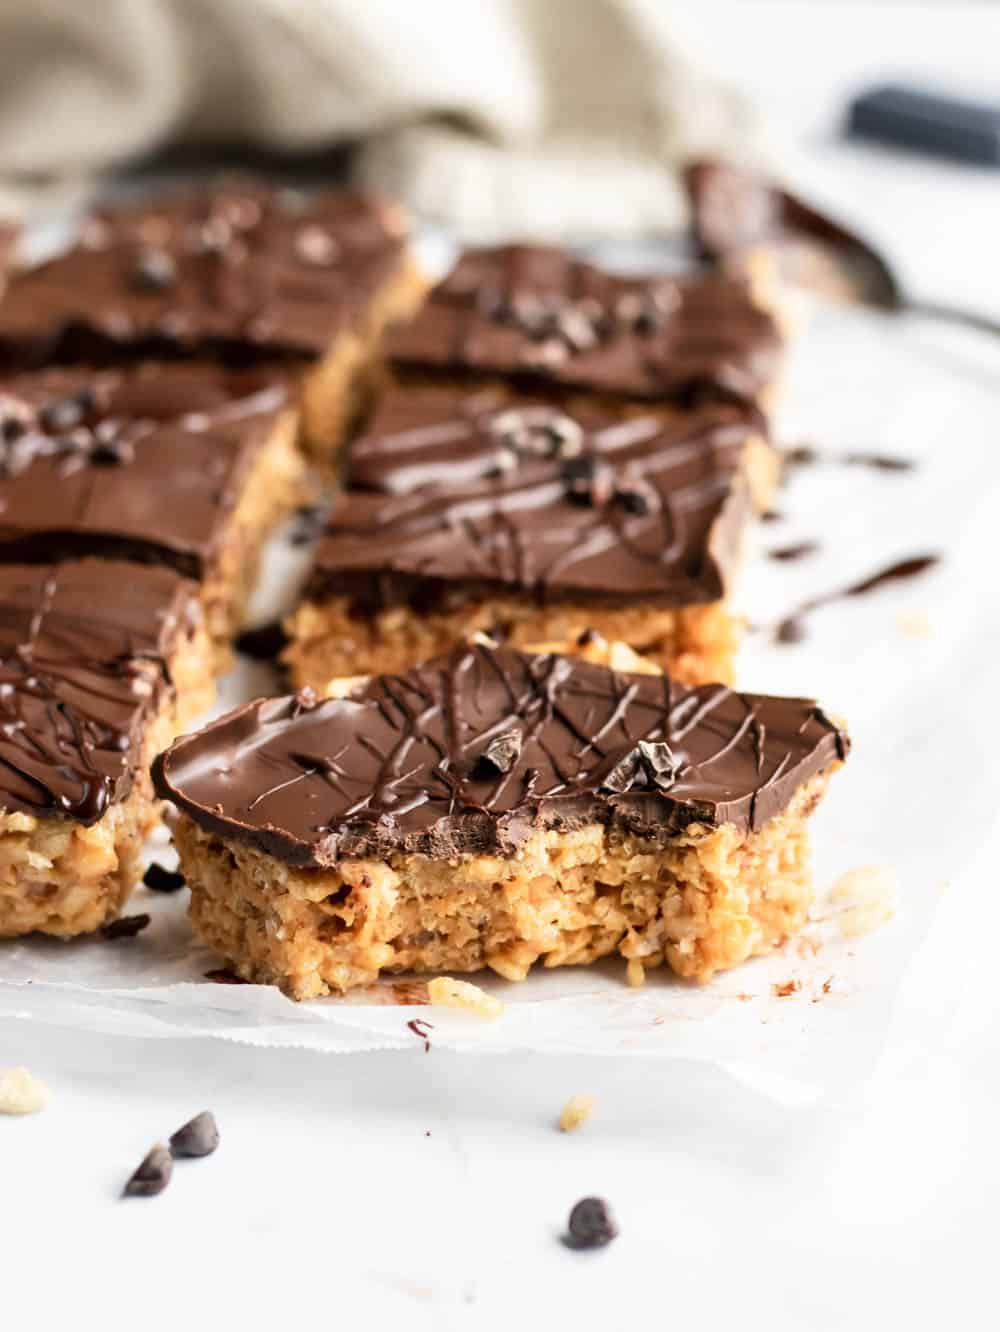 Sliced rice crispy treats with peanut butter and chocolate layer with bite taken out of front piece.